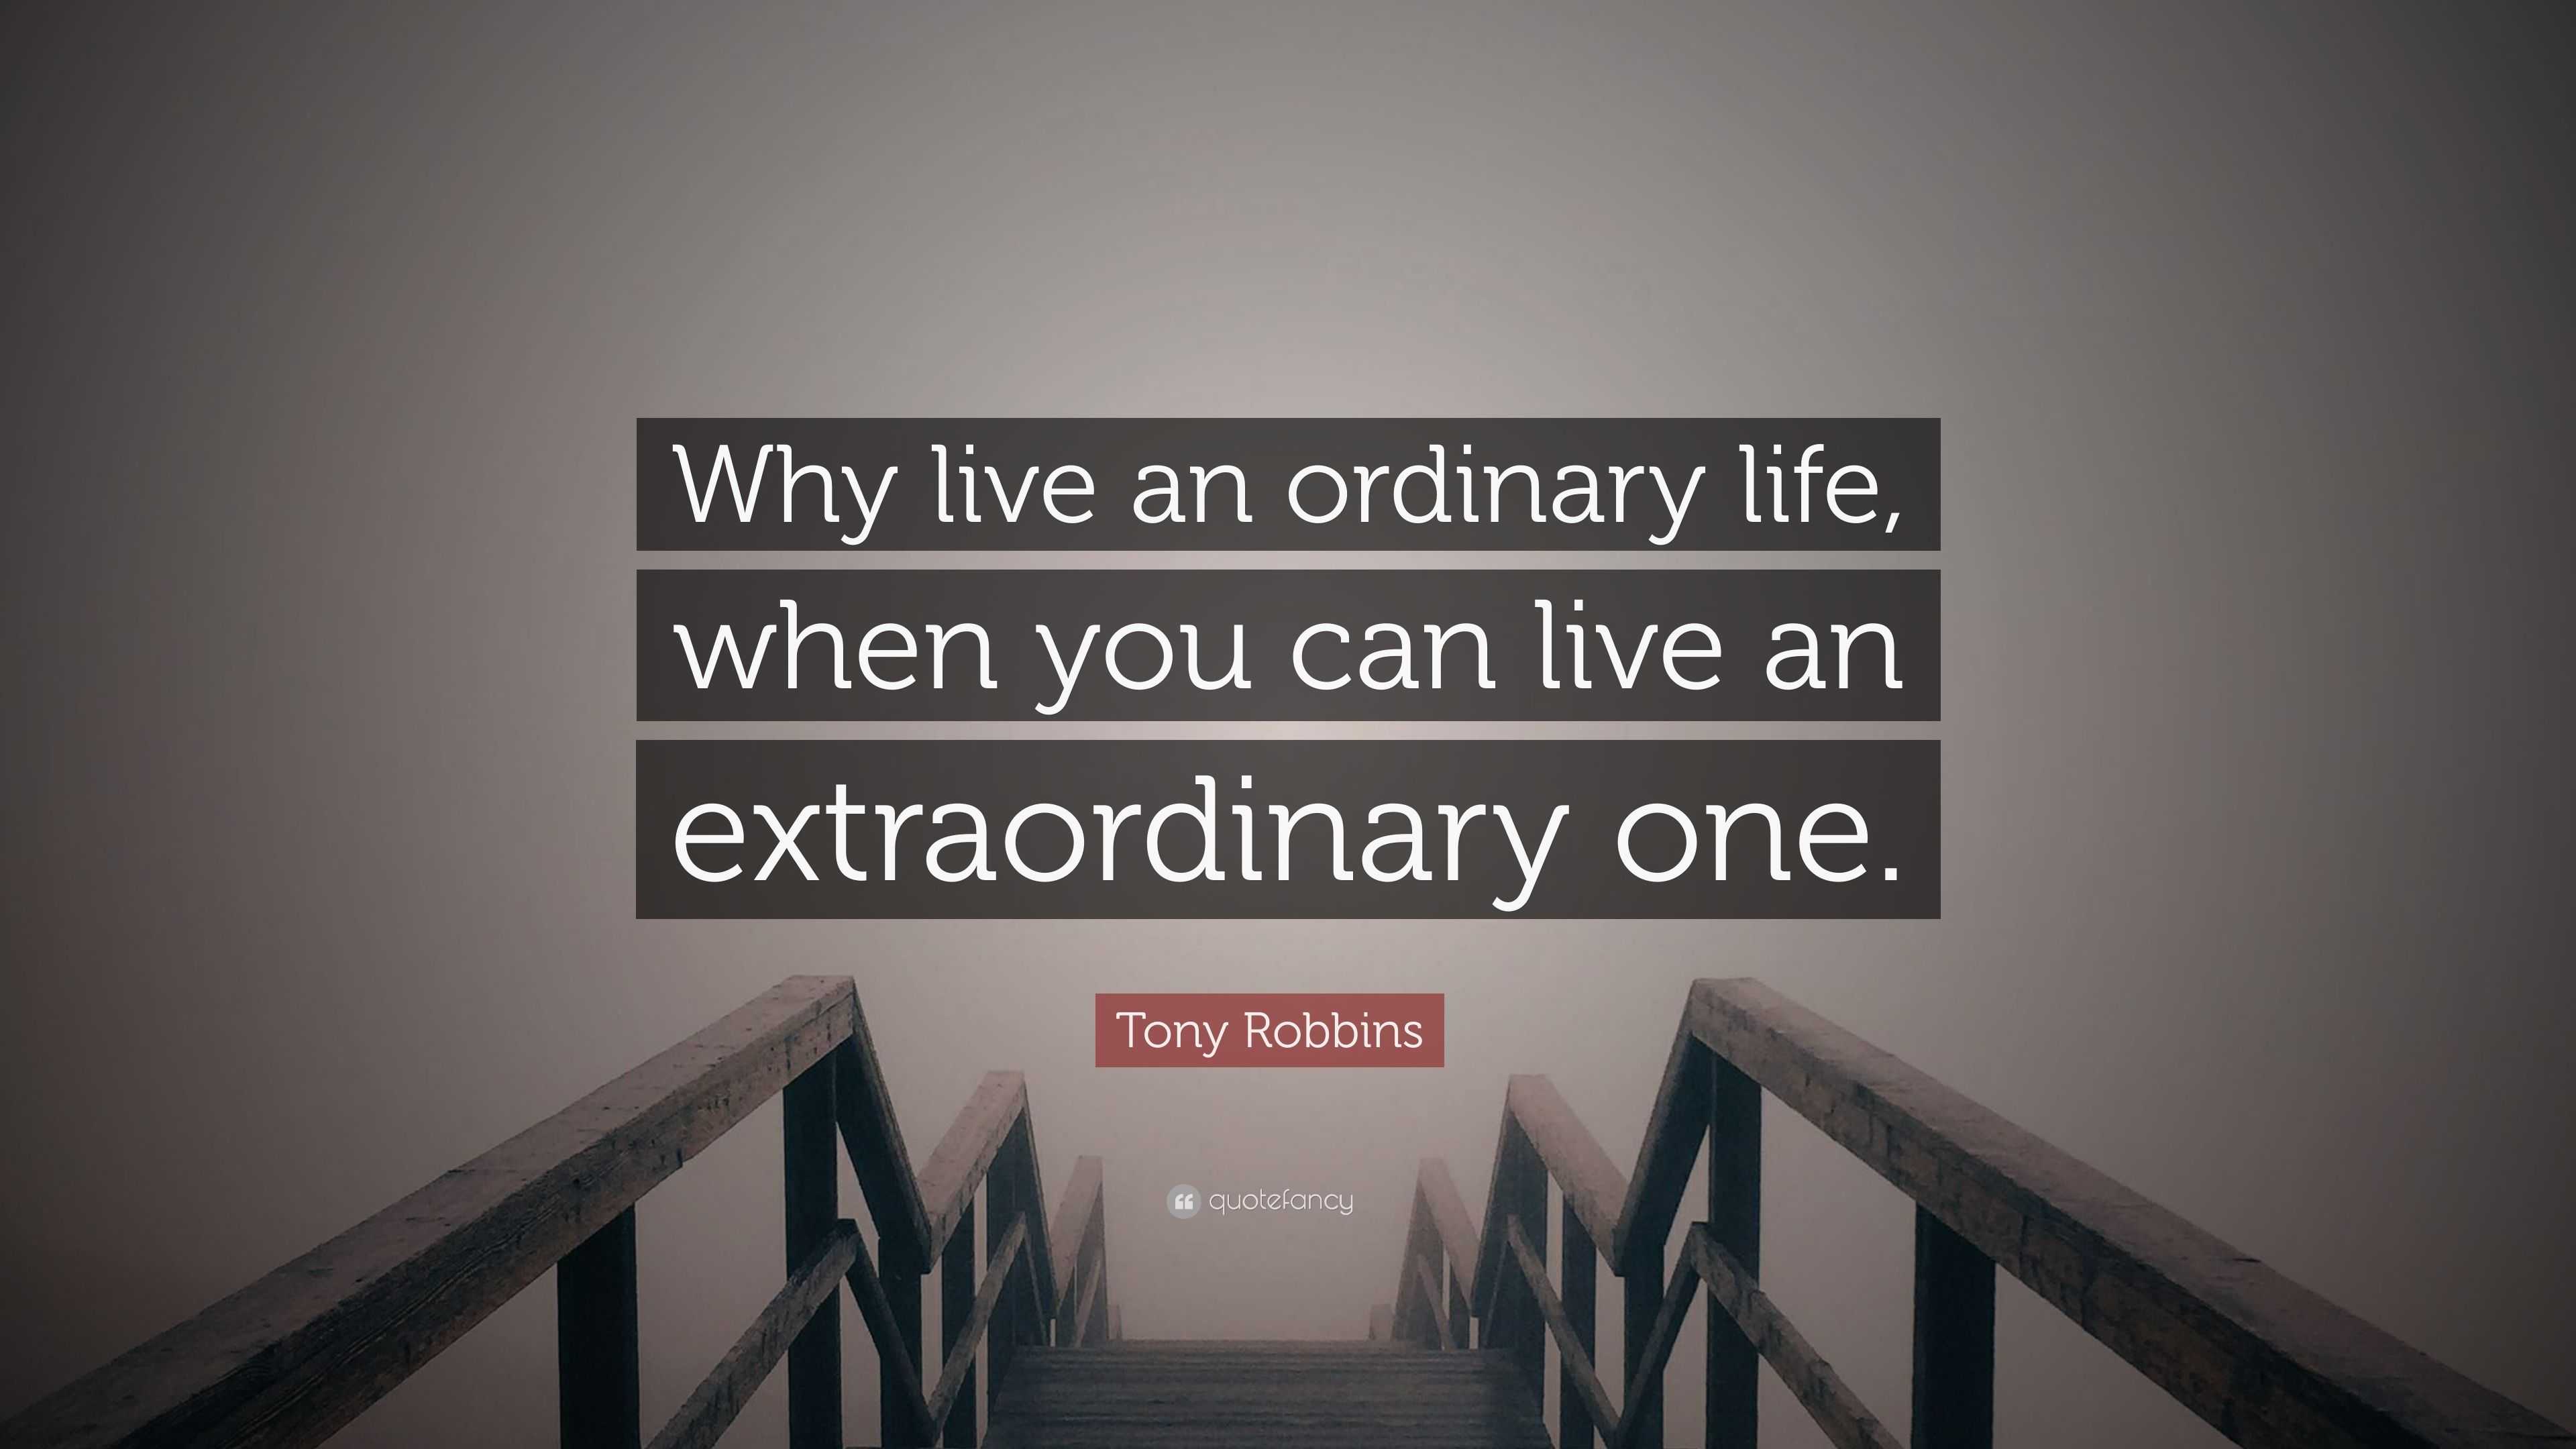 Tony Robbins Quote “Why live an ordinary life when you can live an